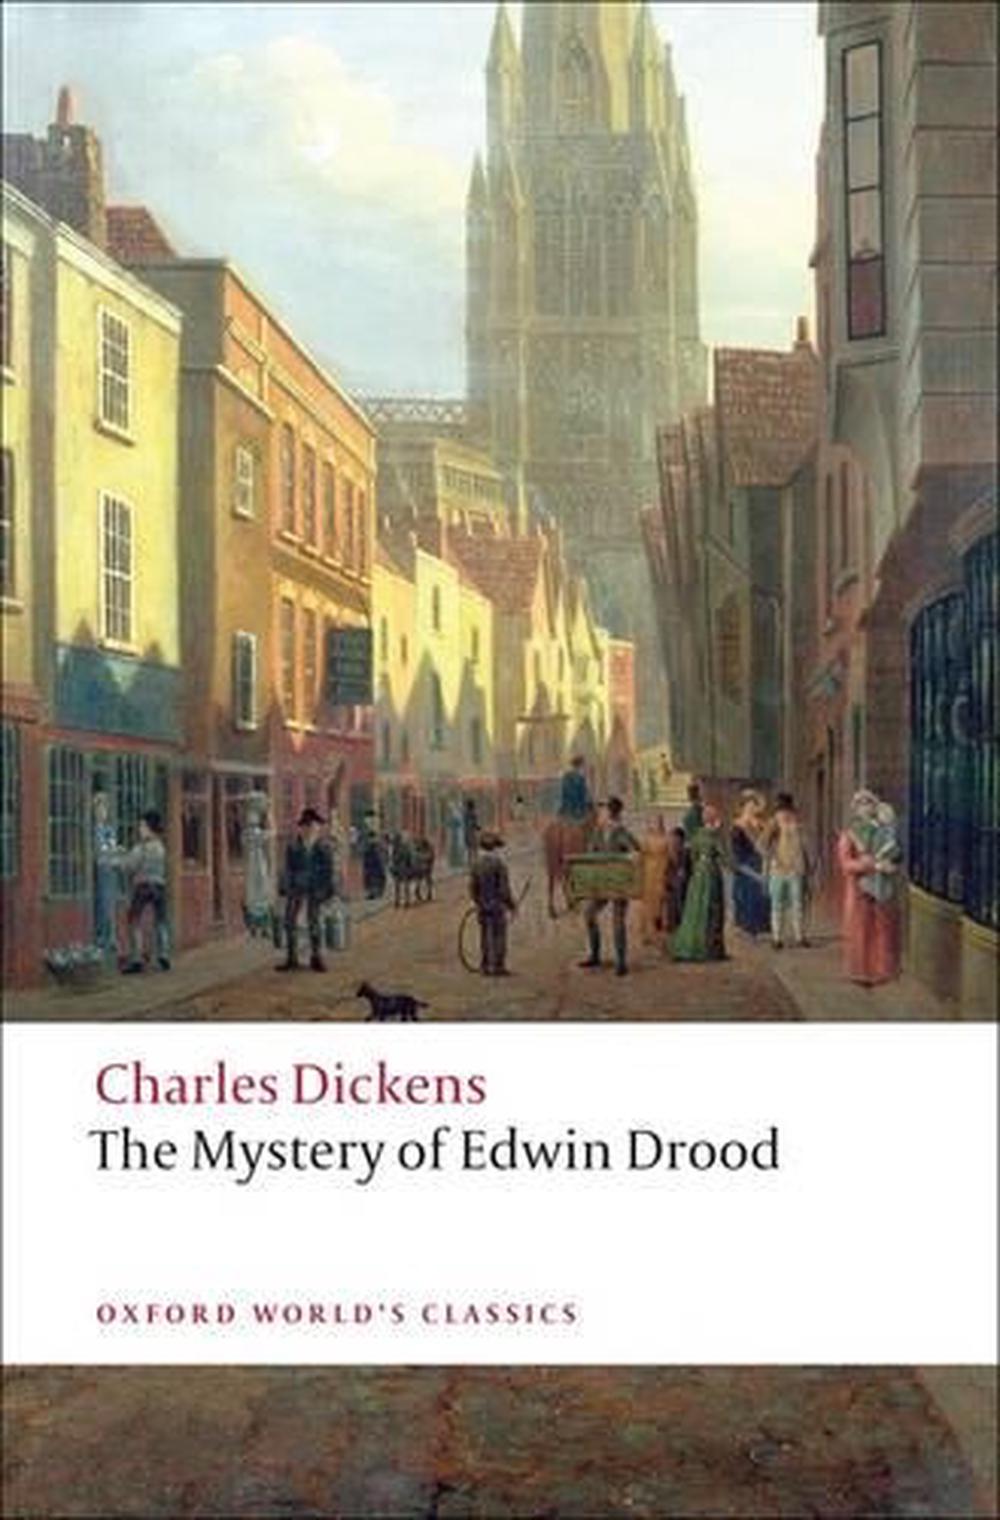 dickens novel the mystery of